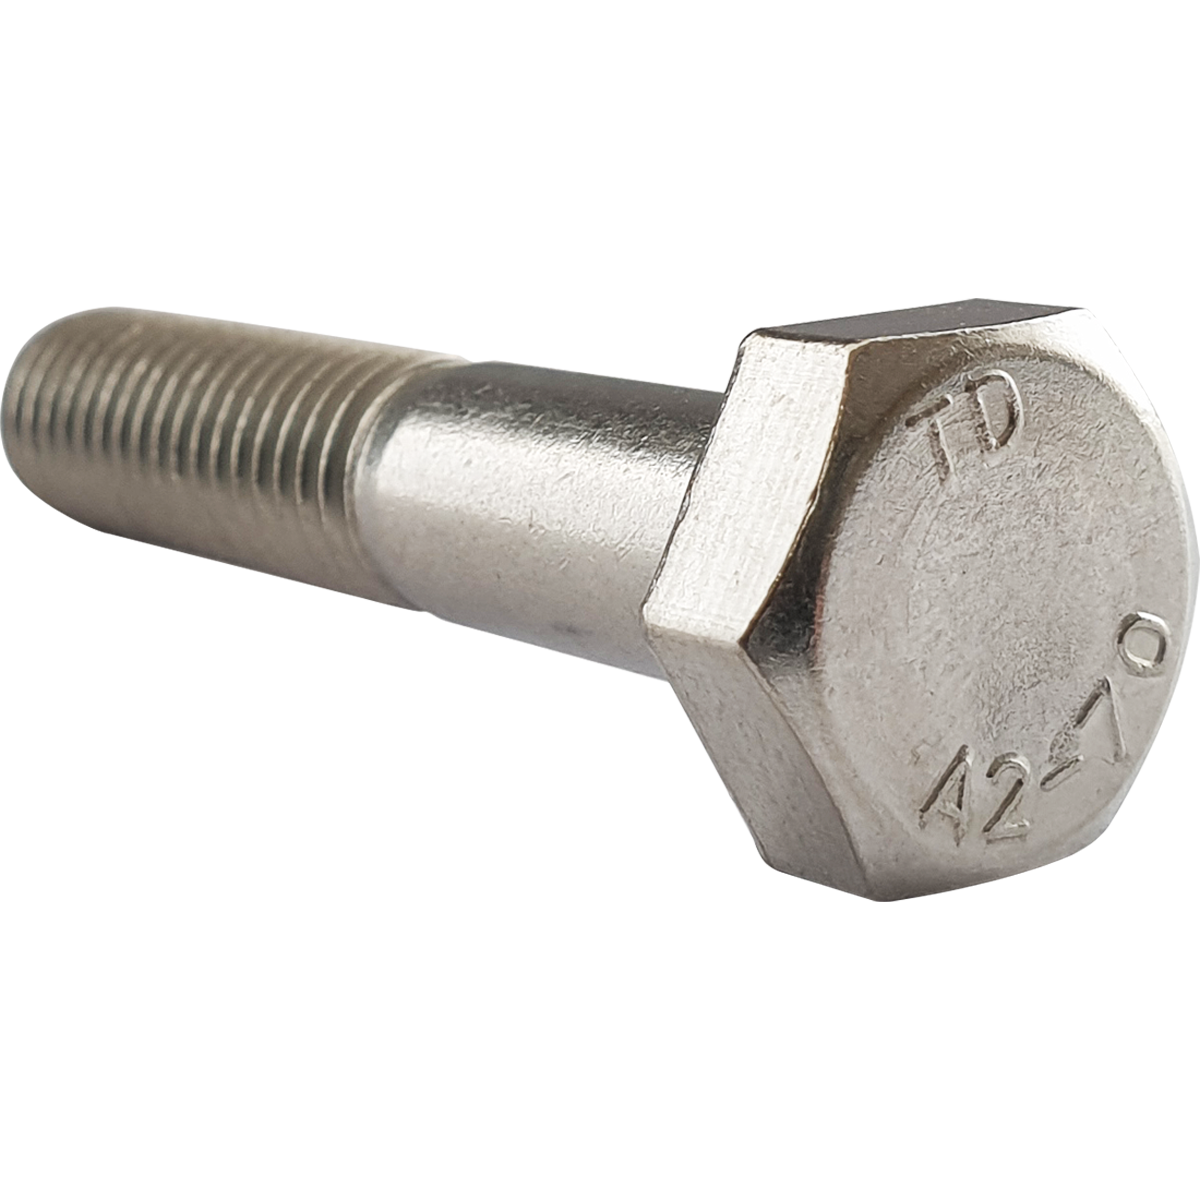 Corrosion resistant, UNC, A2 stainless steel, part thread hex bolts, also known as hexagon bolts, or hex head bolts, are available in various sizes